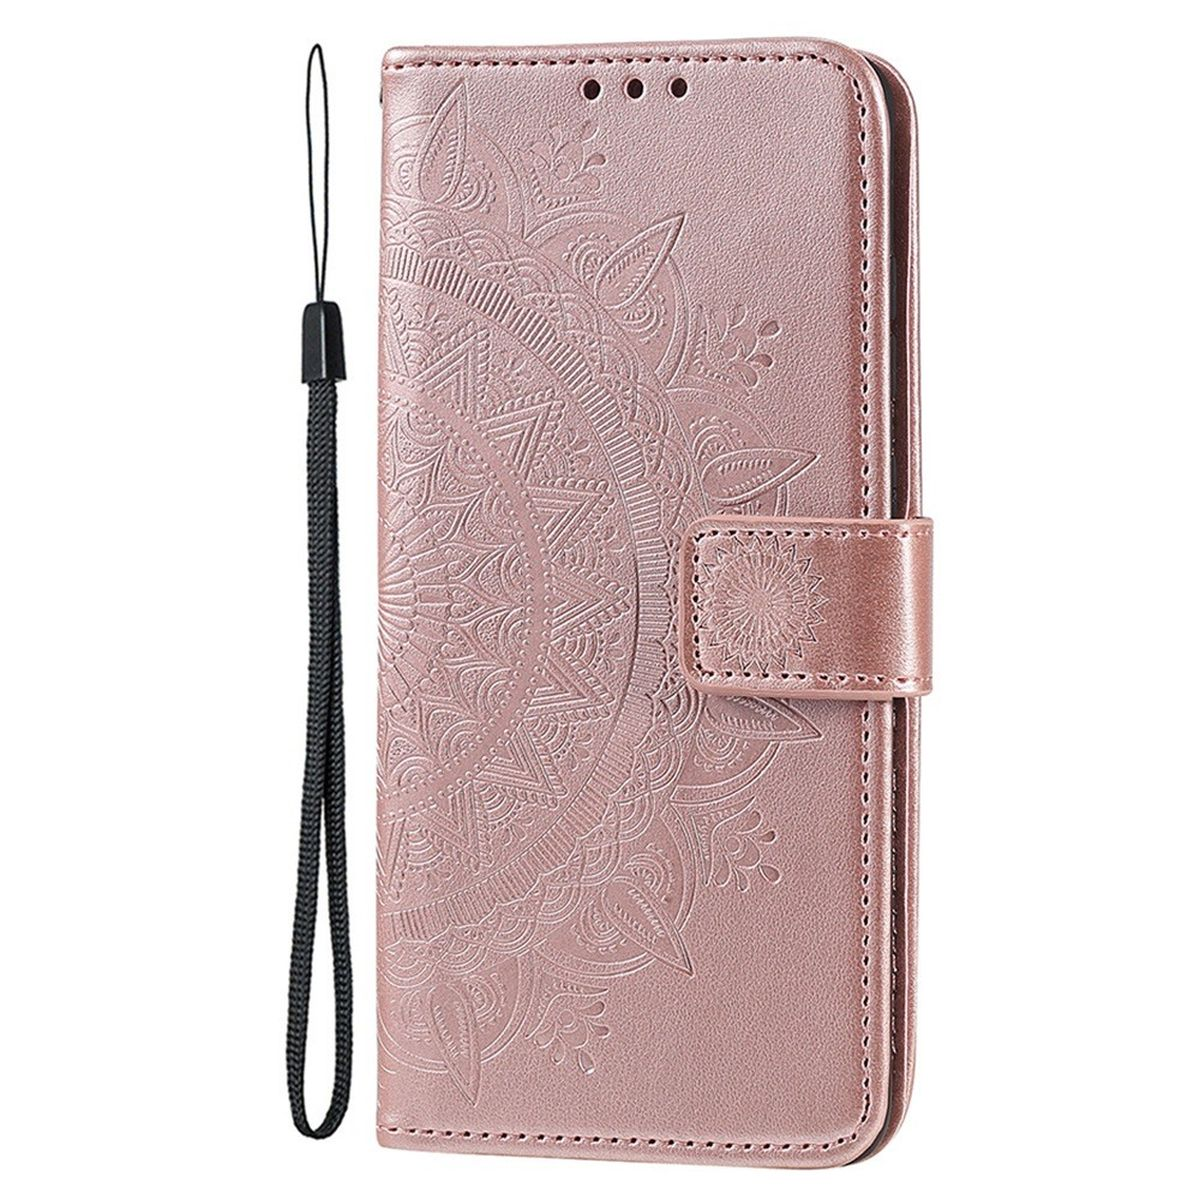 Apple, Rosegold Pro, Mandala Klapphülle 14 iPhone COVERKINGZ mit Muster, Bookcover,